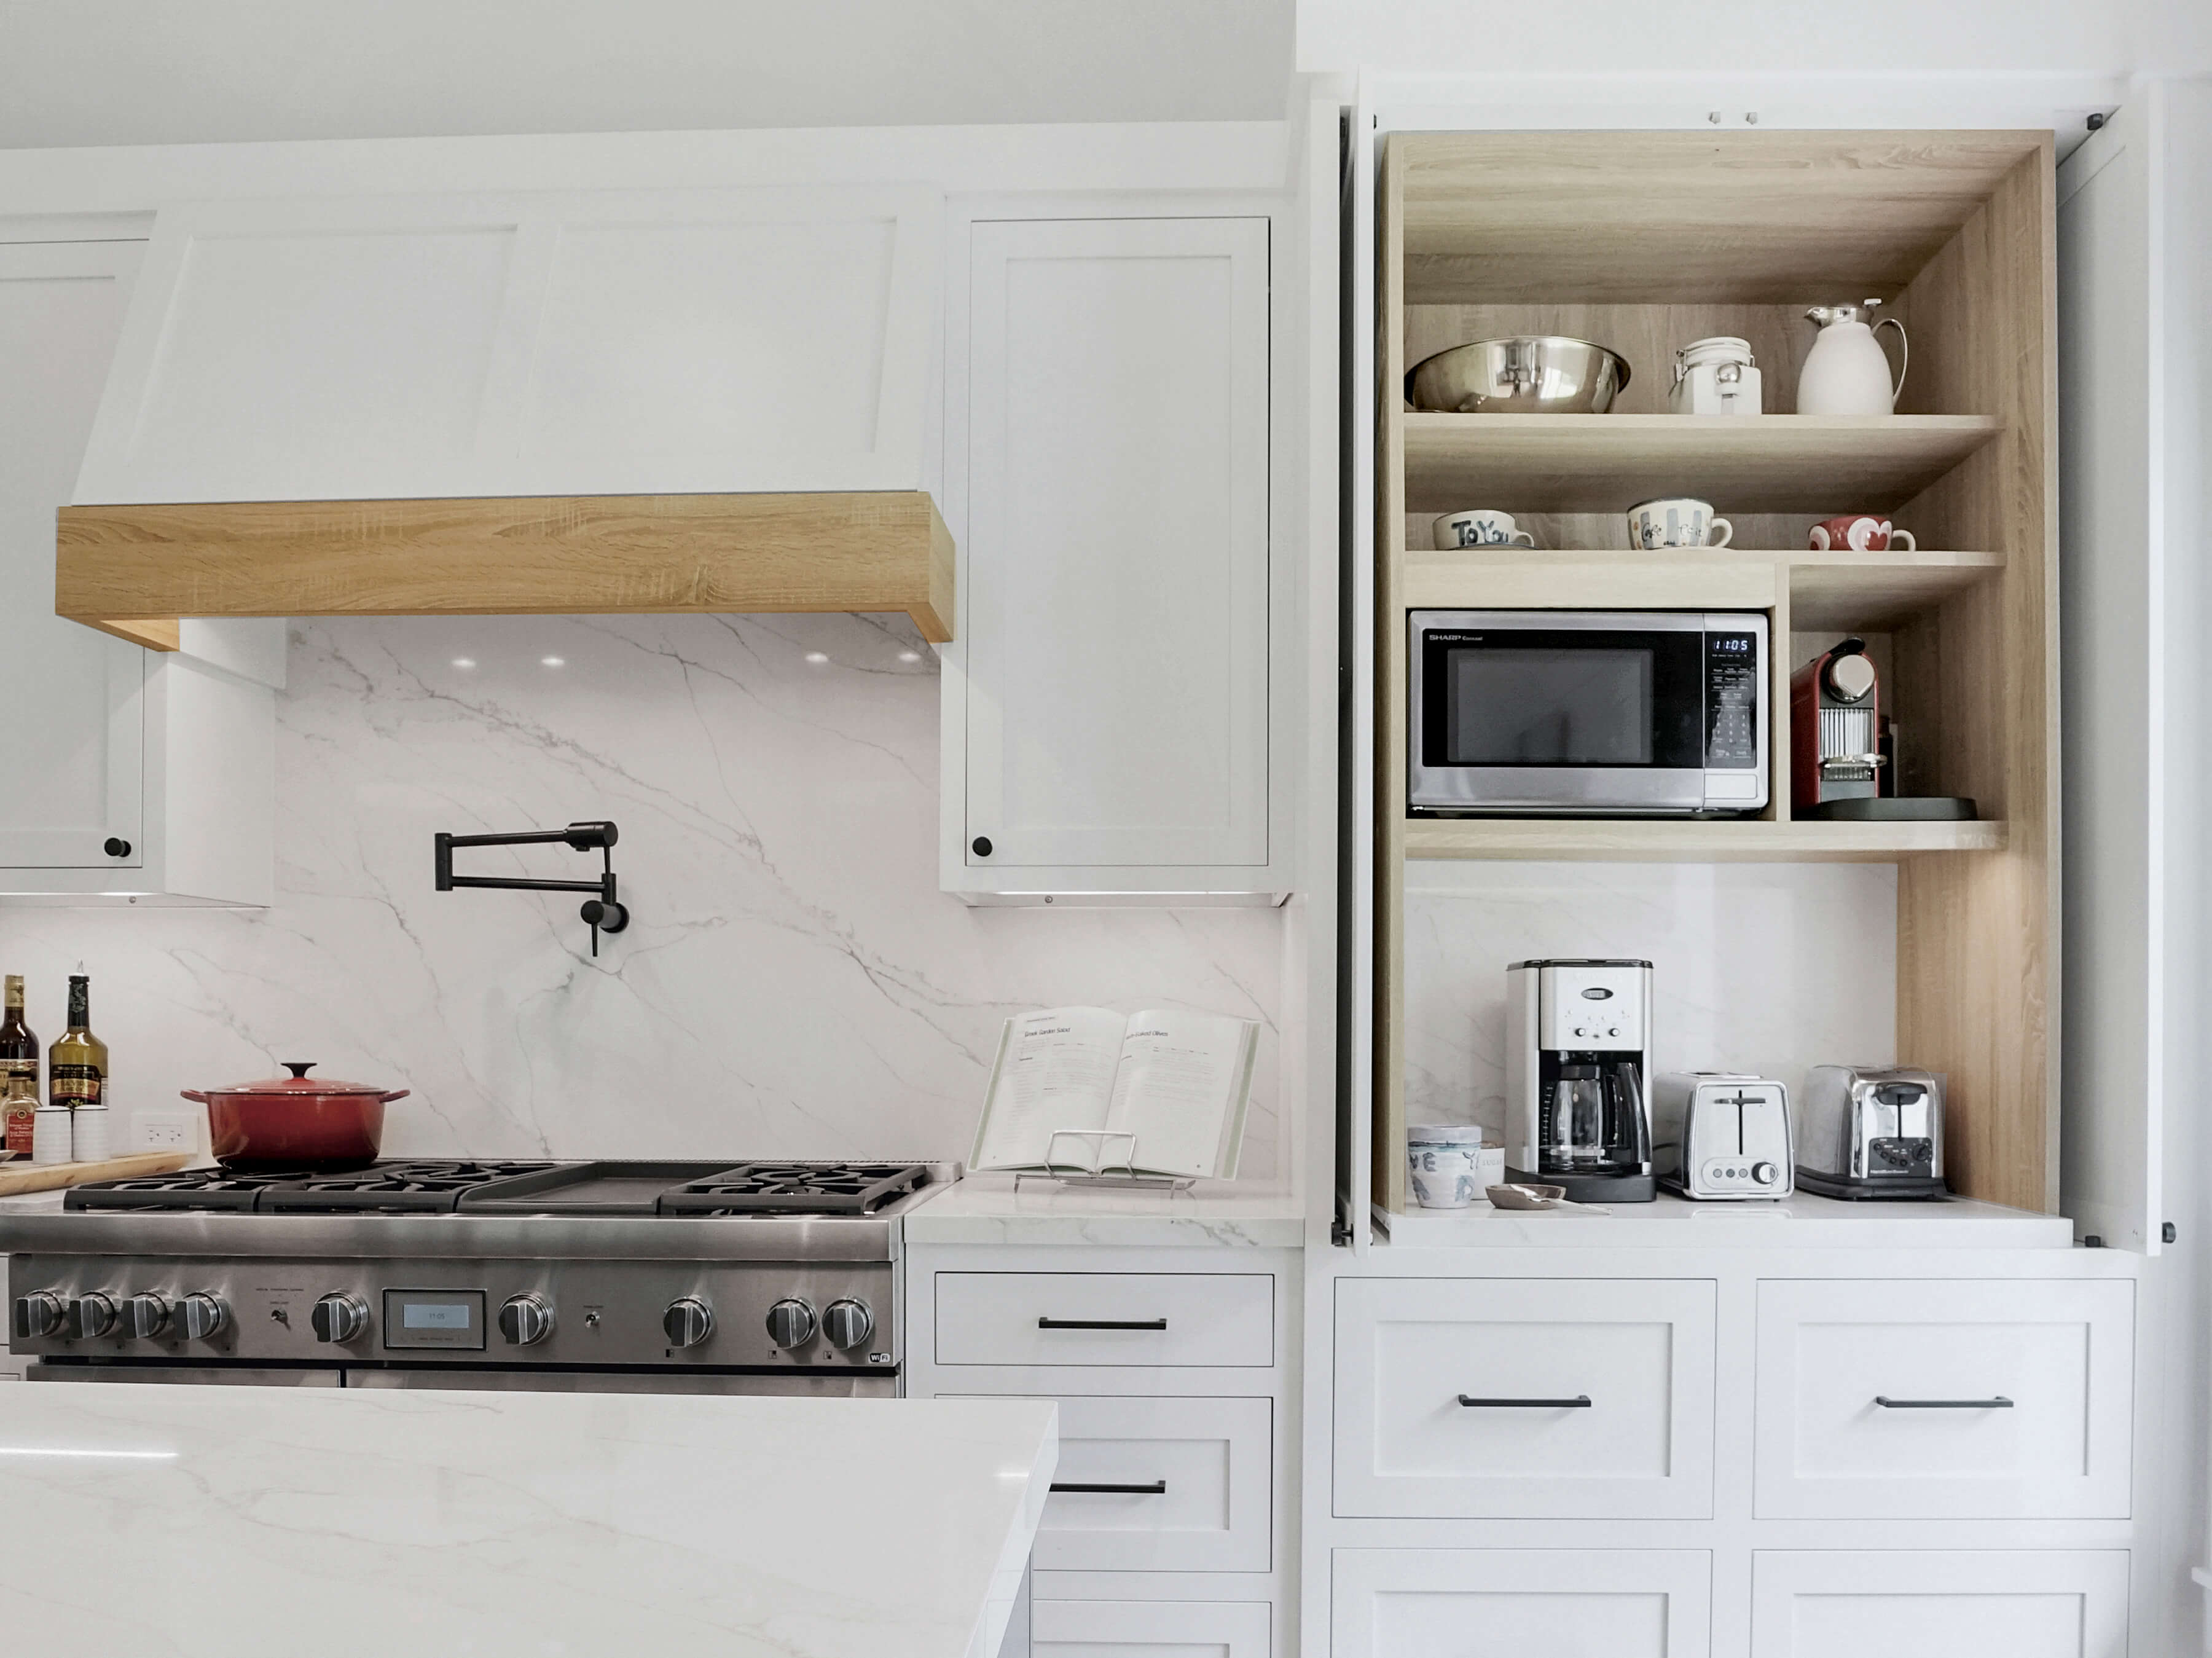 This beverage station hides all of the small appliances for crafting beverages as well as a toaster with an appliance door above the beverage fridge as well as cup storage in the cabinet to the side and pantry storage for coffee supplies and breakfast fixings in the cabinet above. The kitchen has white painted inset cabinets and a modern wood hood with a light stained wood frieze accent.